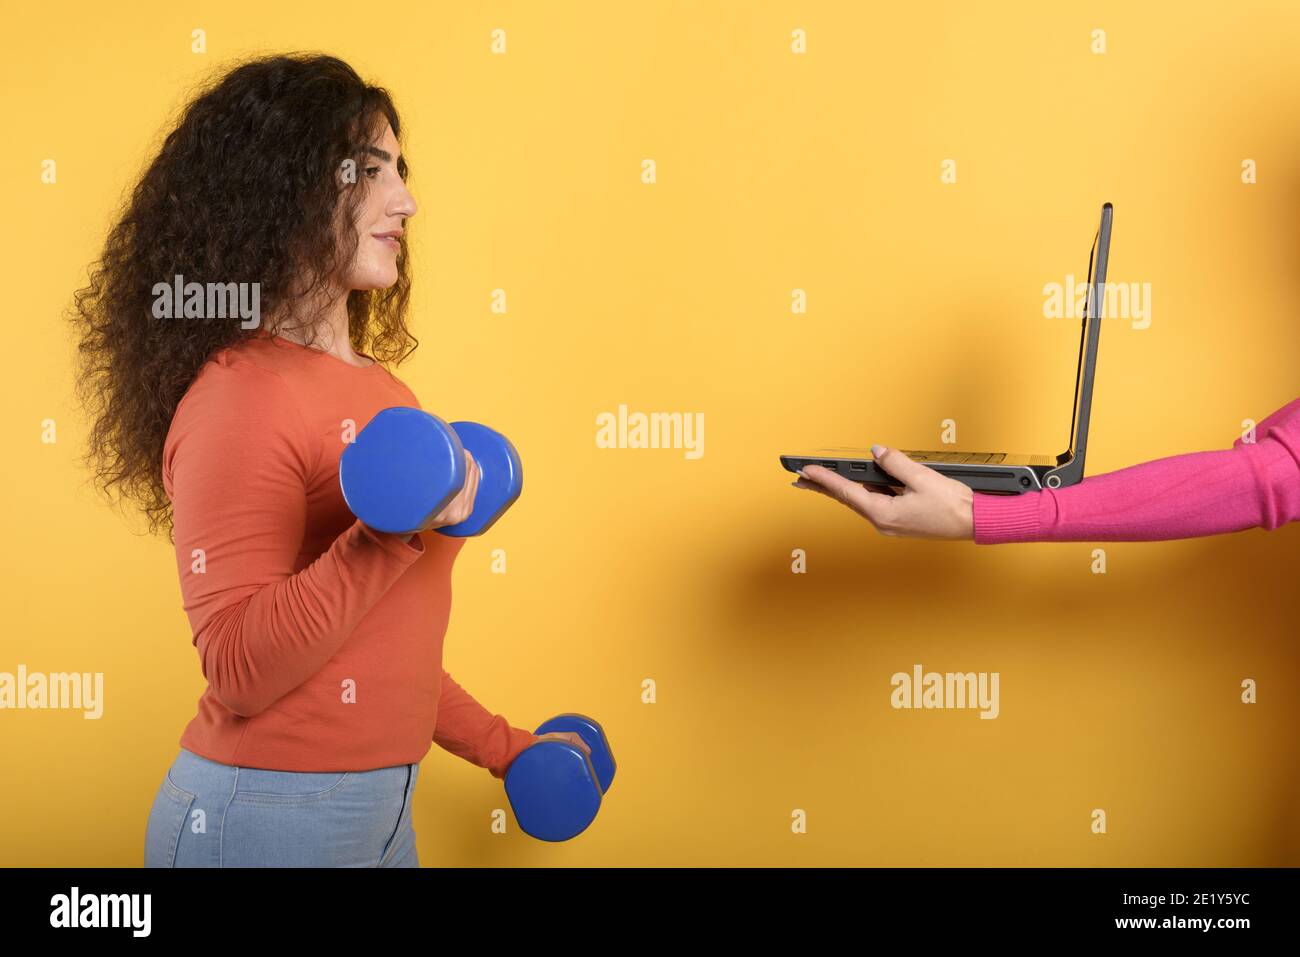 Girl with handlebars ready to start the gym online with a computer. yellow background Stock Photo